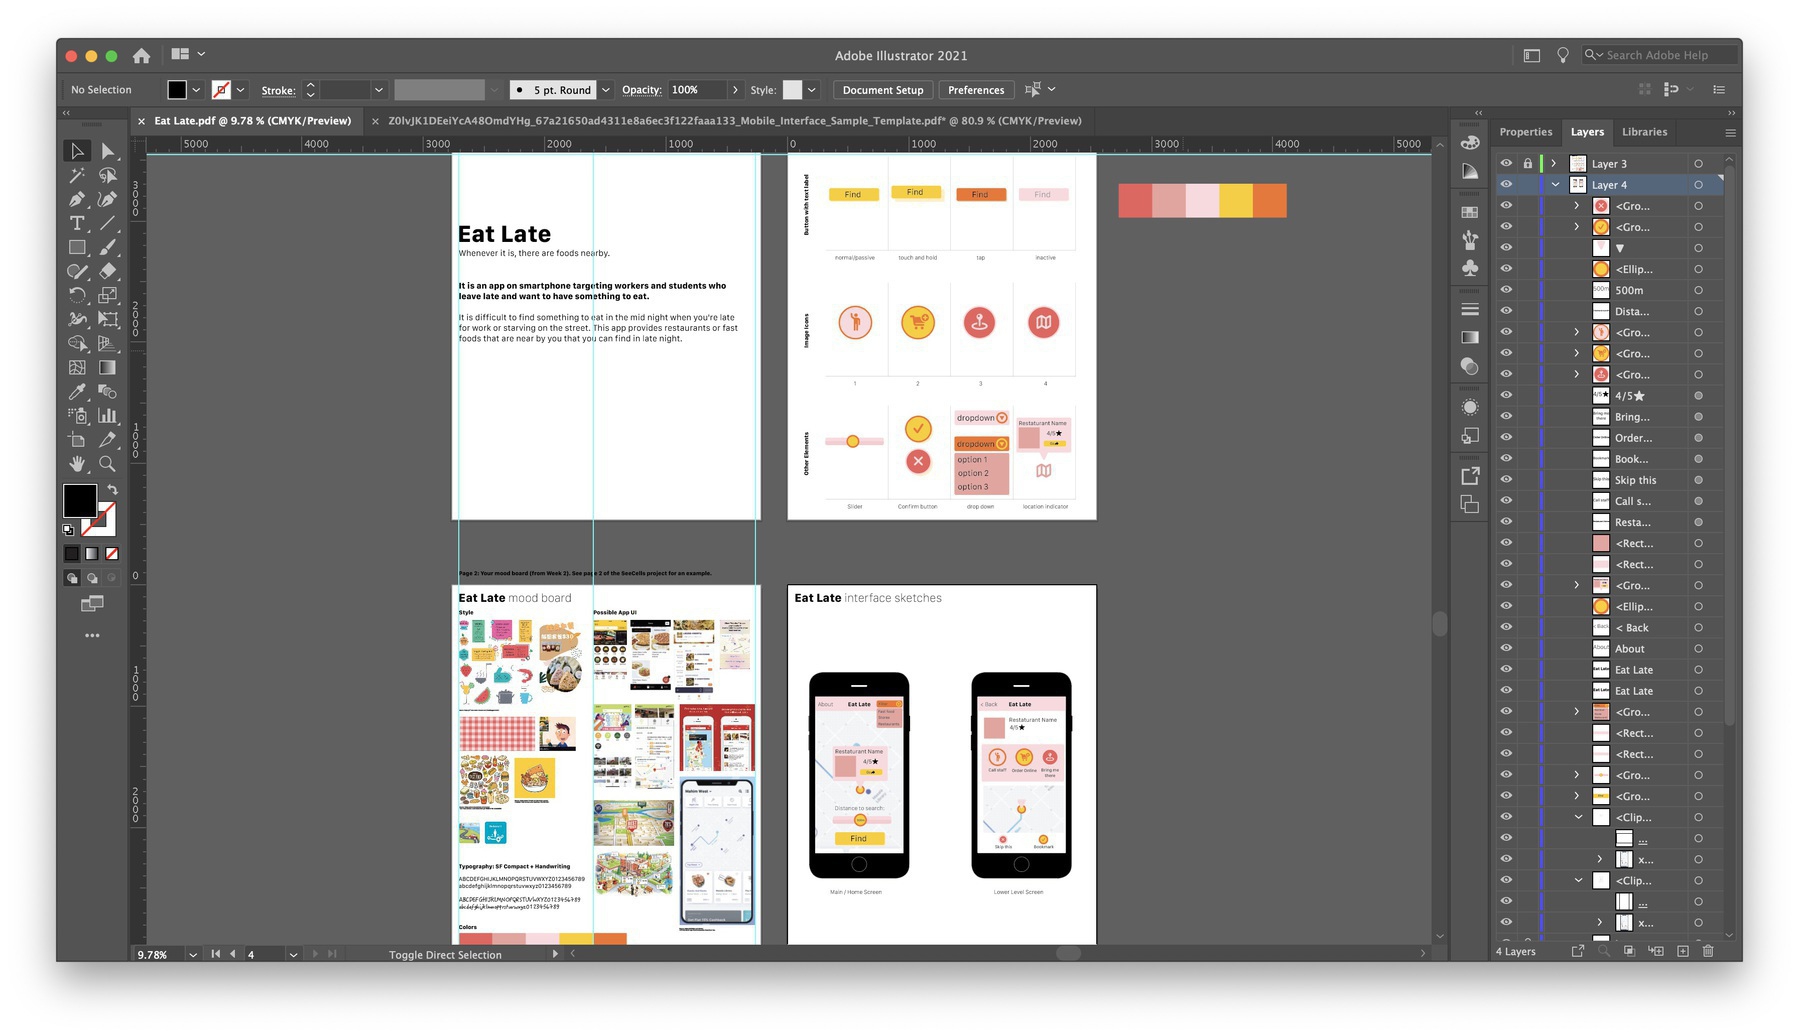 A screenshot of Adobe Illustration software with 4 pages of app sketches and mood board.